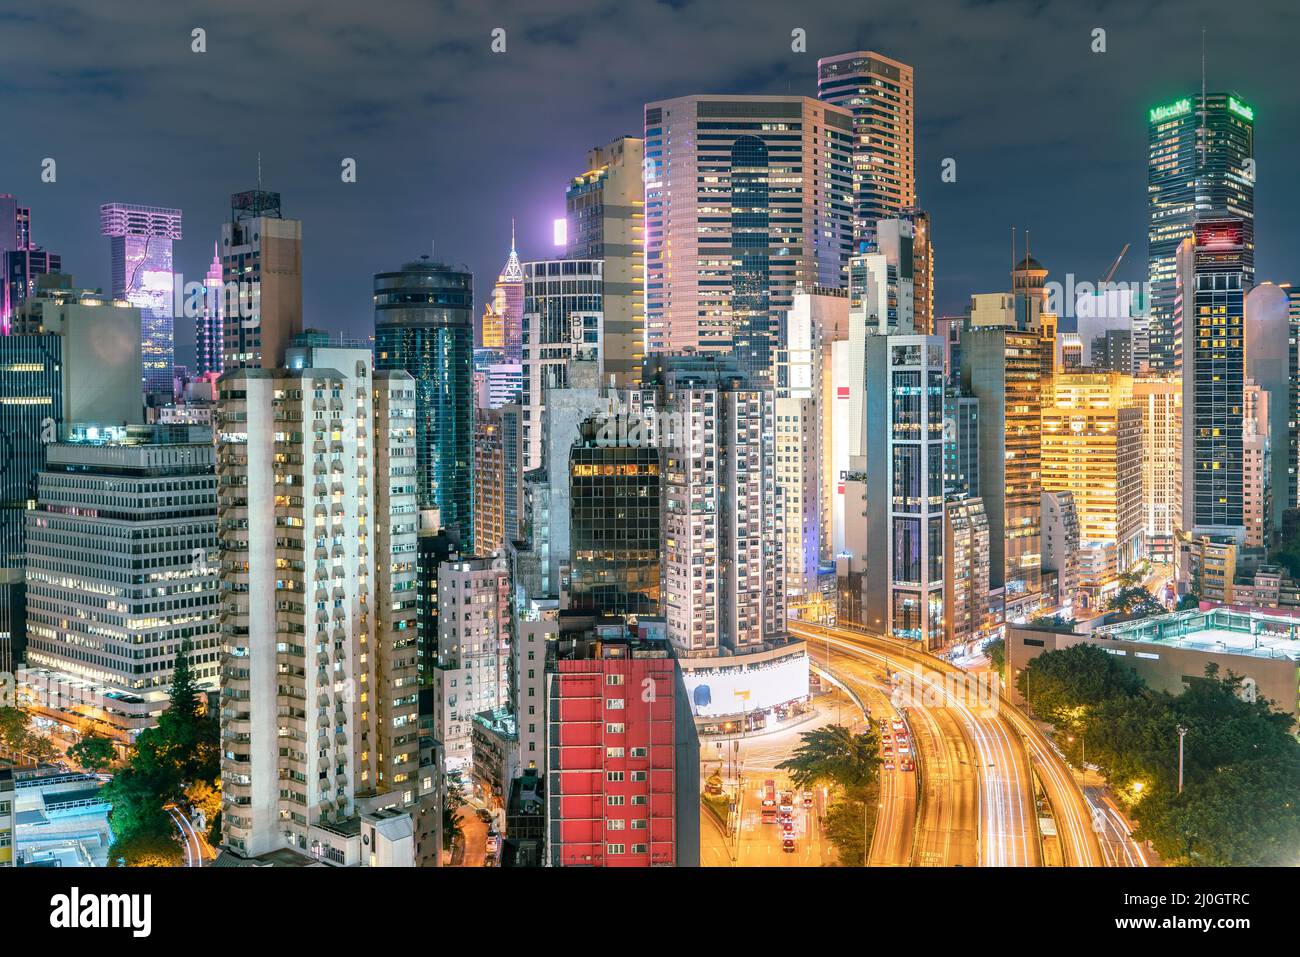 The amazing night and sunset view of cityscape and skyscrapers in Hong-Kong Stock Photo